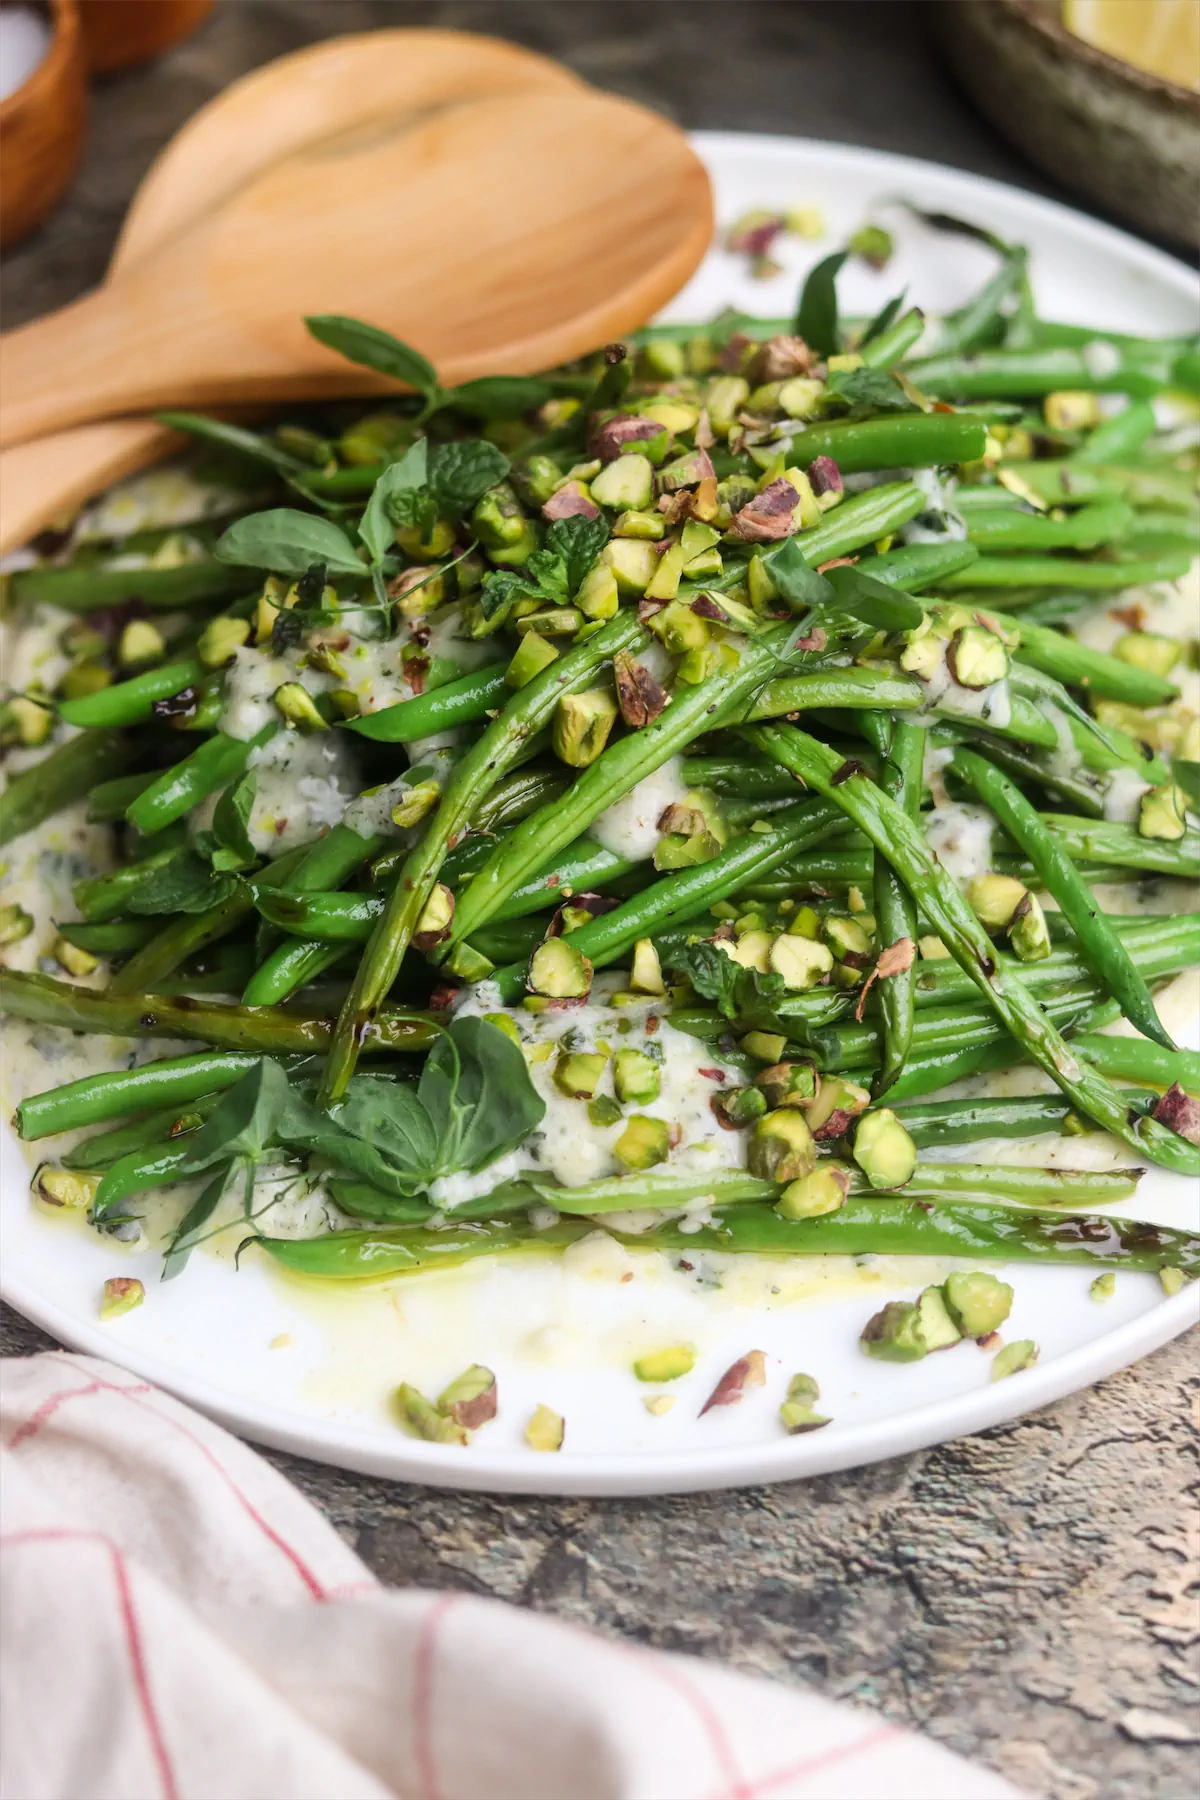 Grilled green beans on yogurt and mint dressing topped with nuts on a plate.